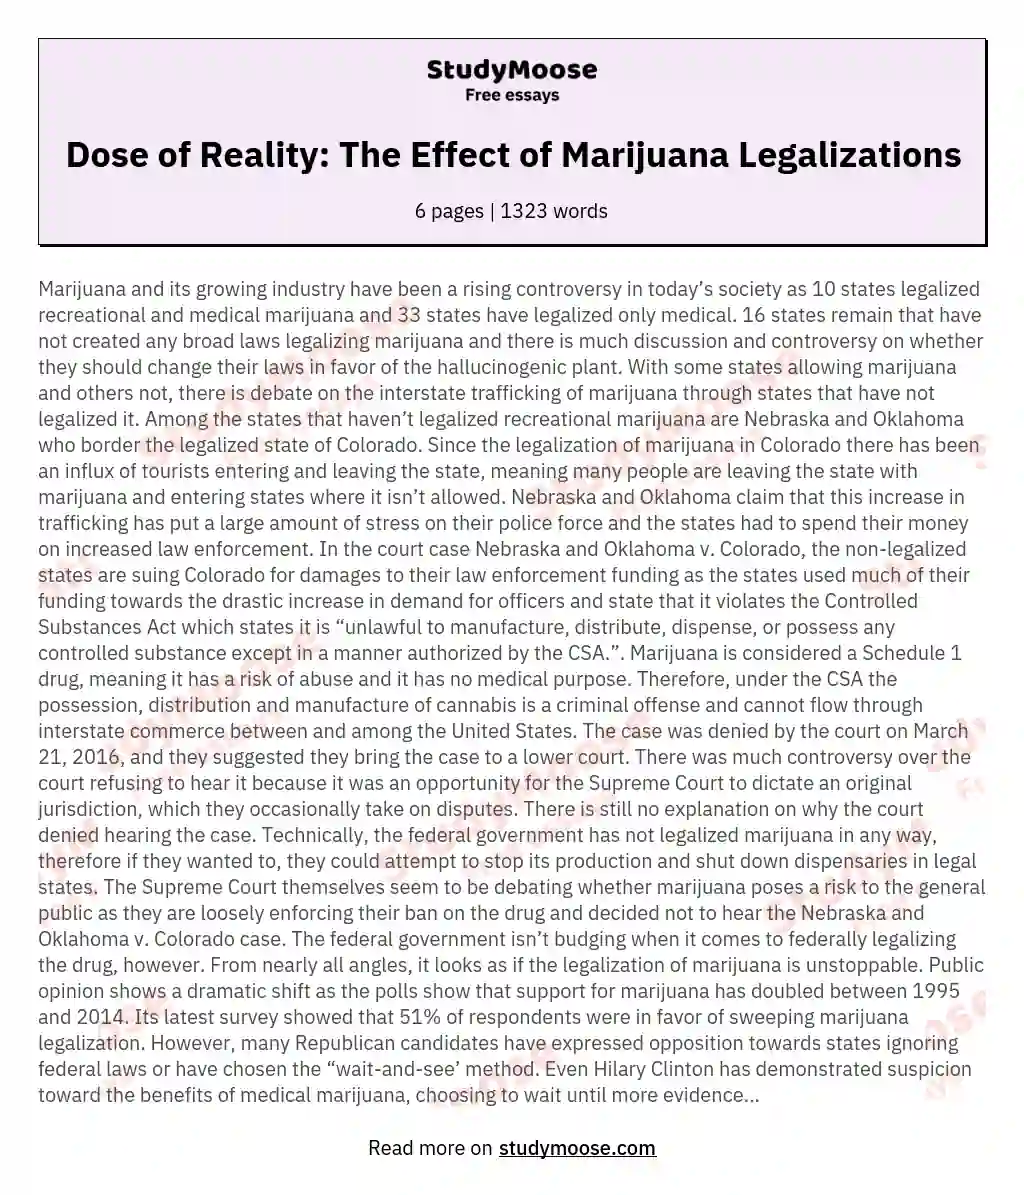 Dose of Reality: The Effect of Marijuana Legalizations essay